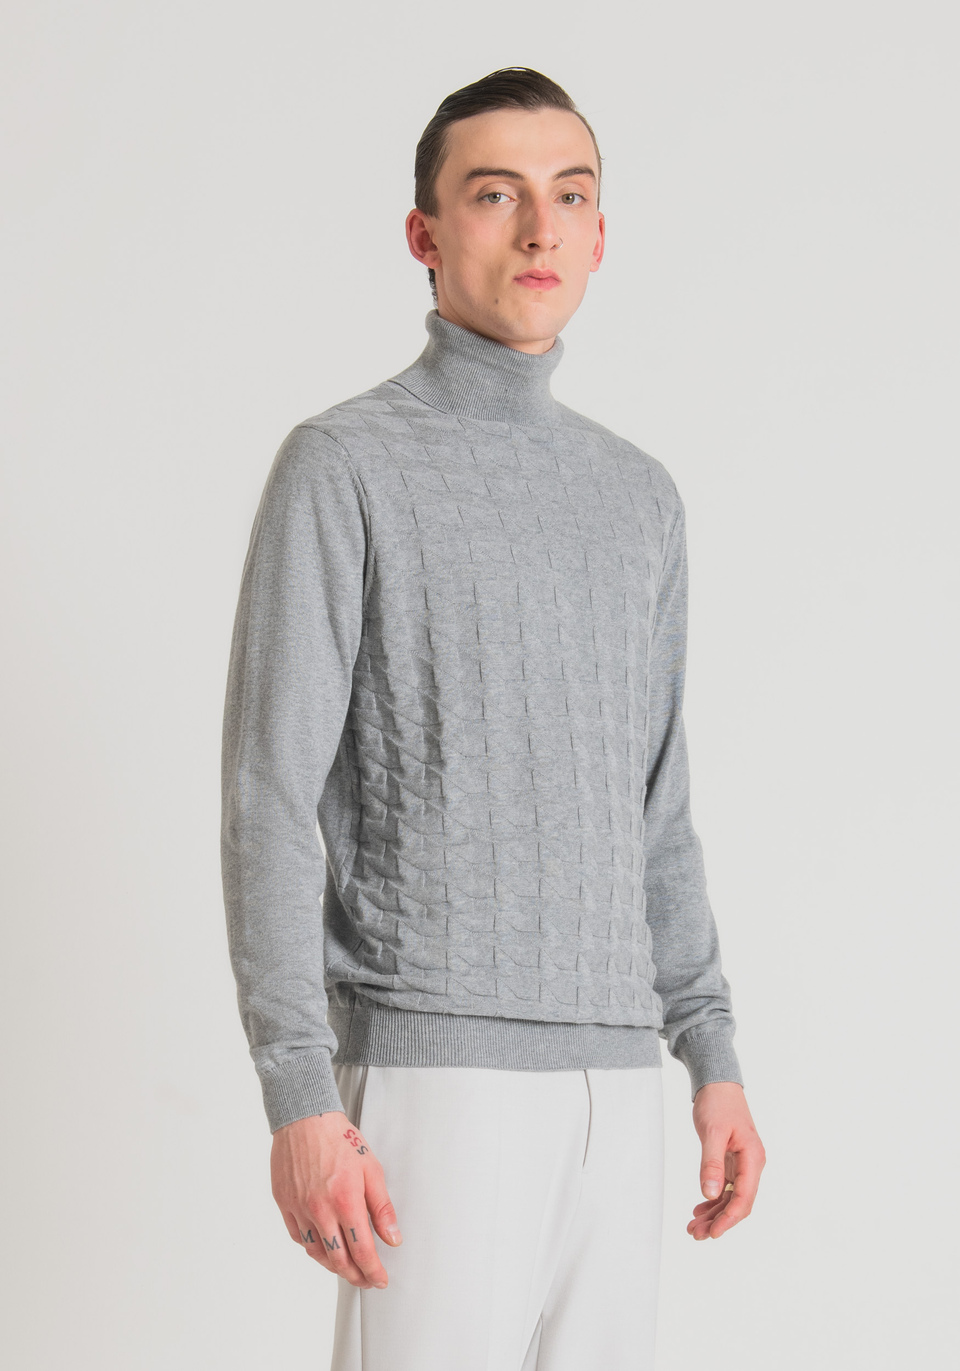 REGULAR FIT SWEATER IN WOOL BLEND COTTON YARN WITH 3D JACQUARD PATTERN - Antony Morato Online Shop